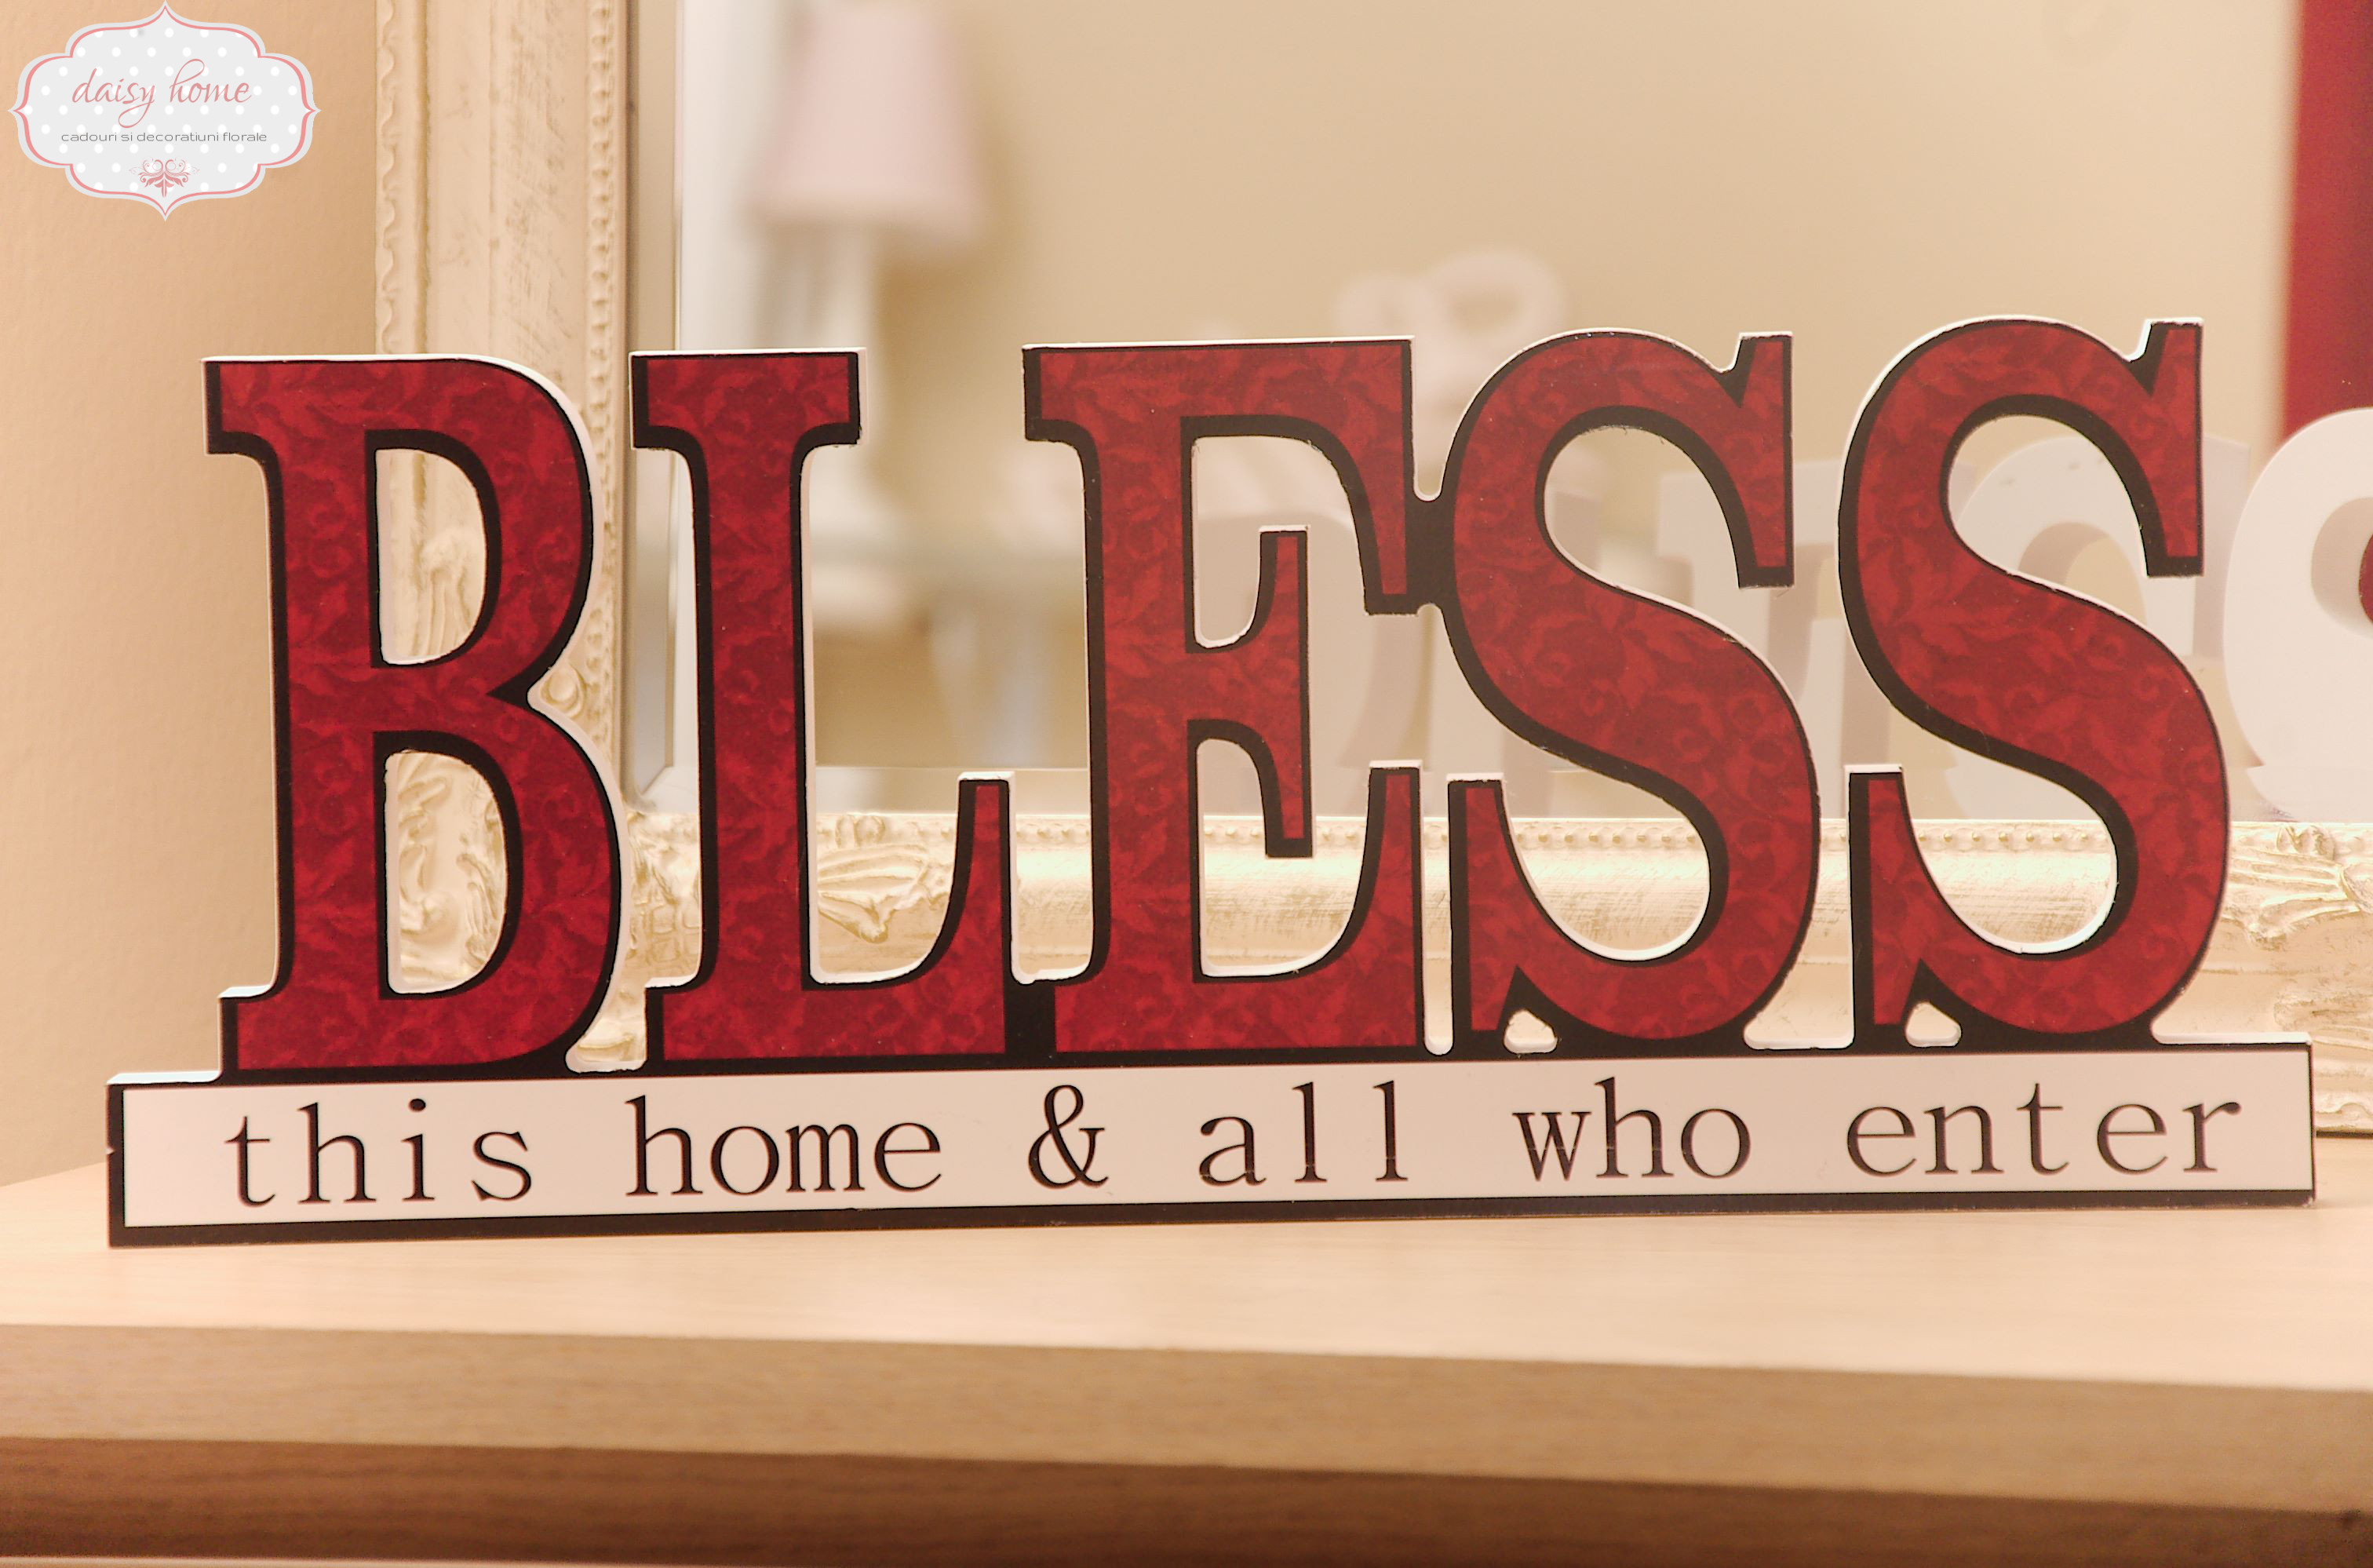 “Bless this home & all who enter”